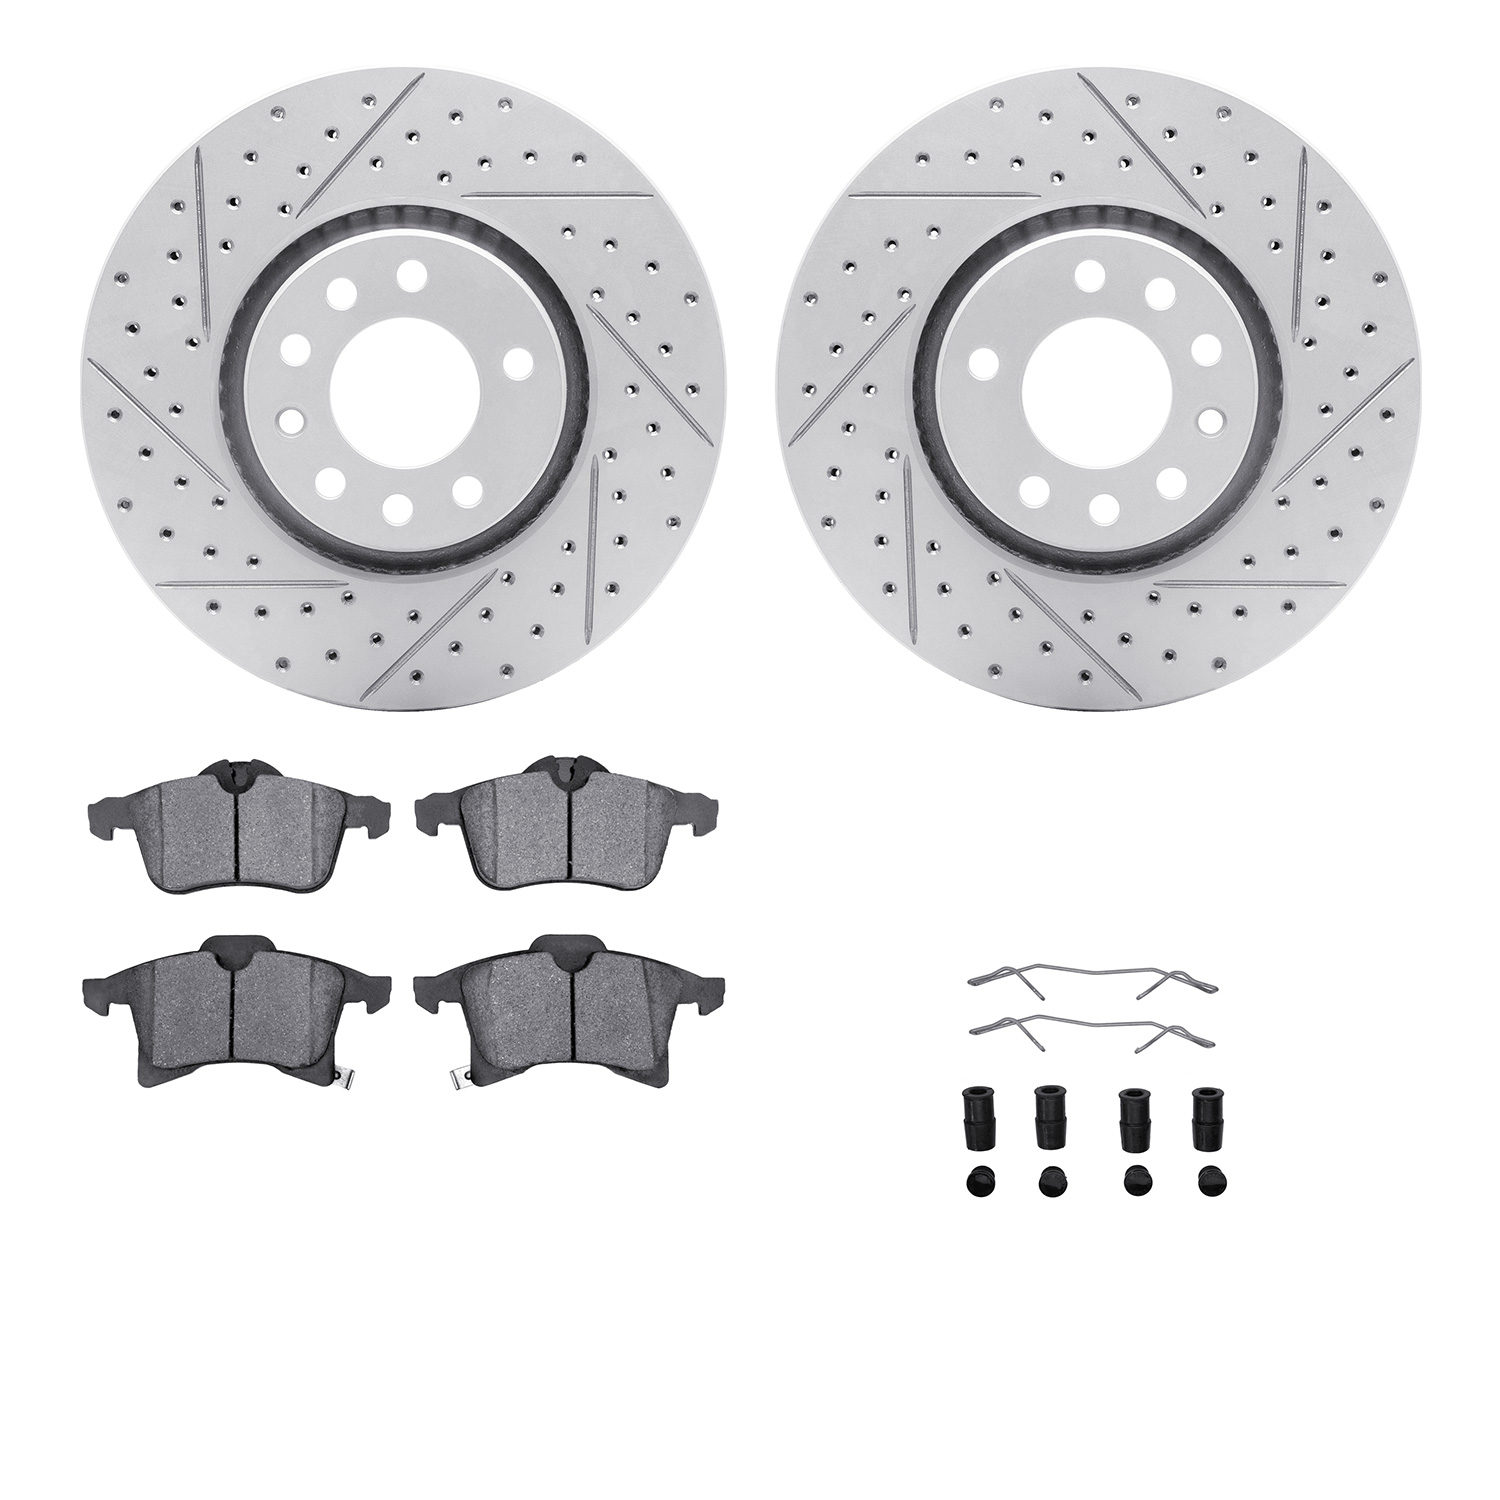 2512-65005 Geoperformance Drilled/Slotted Rotors w/5000 Advanced Brake Pads Kit & Hardware, 2004-2008 GM, Position: Front